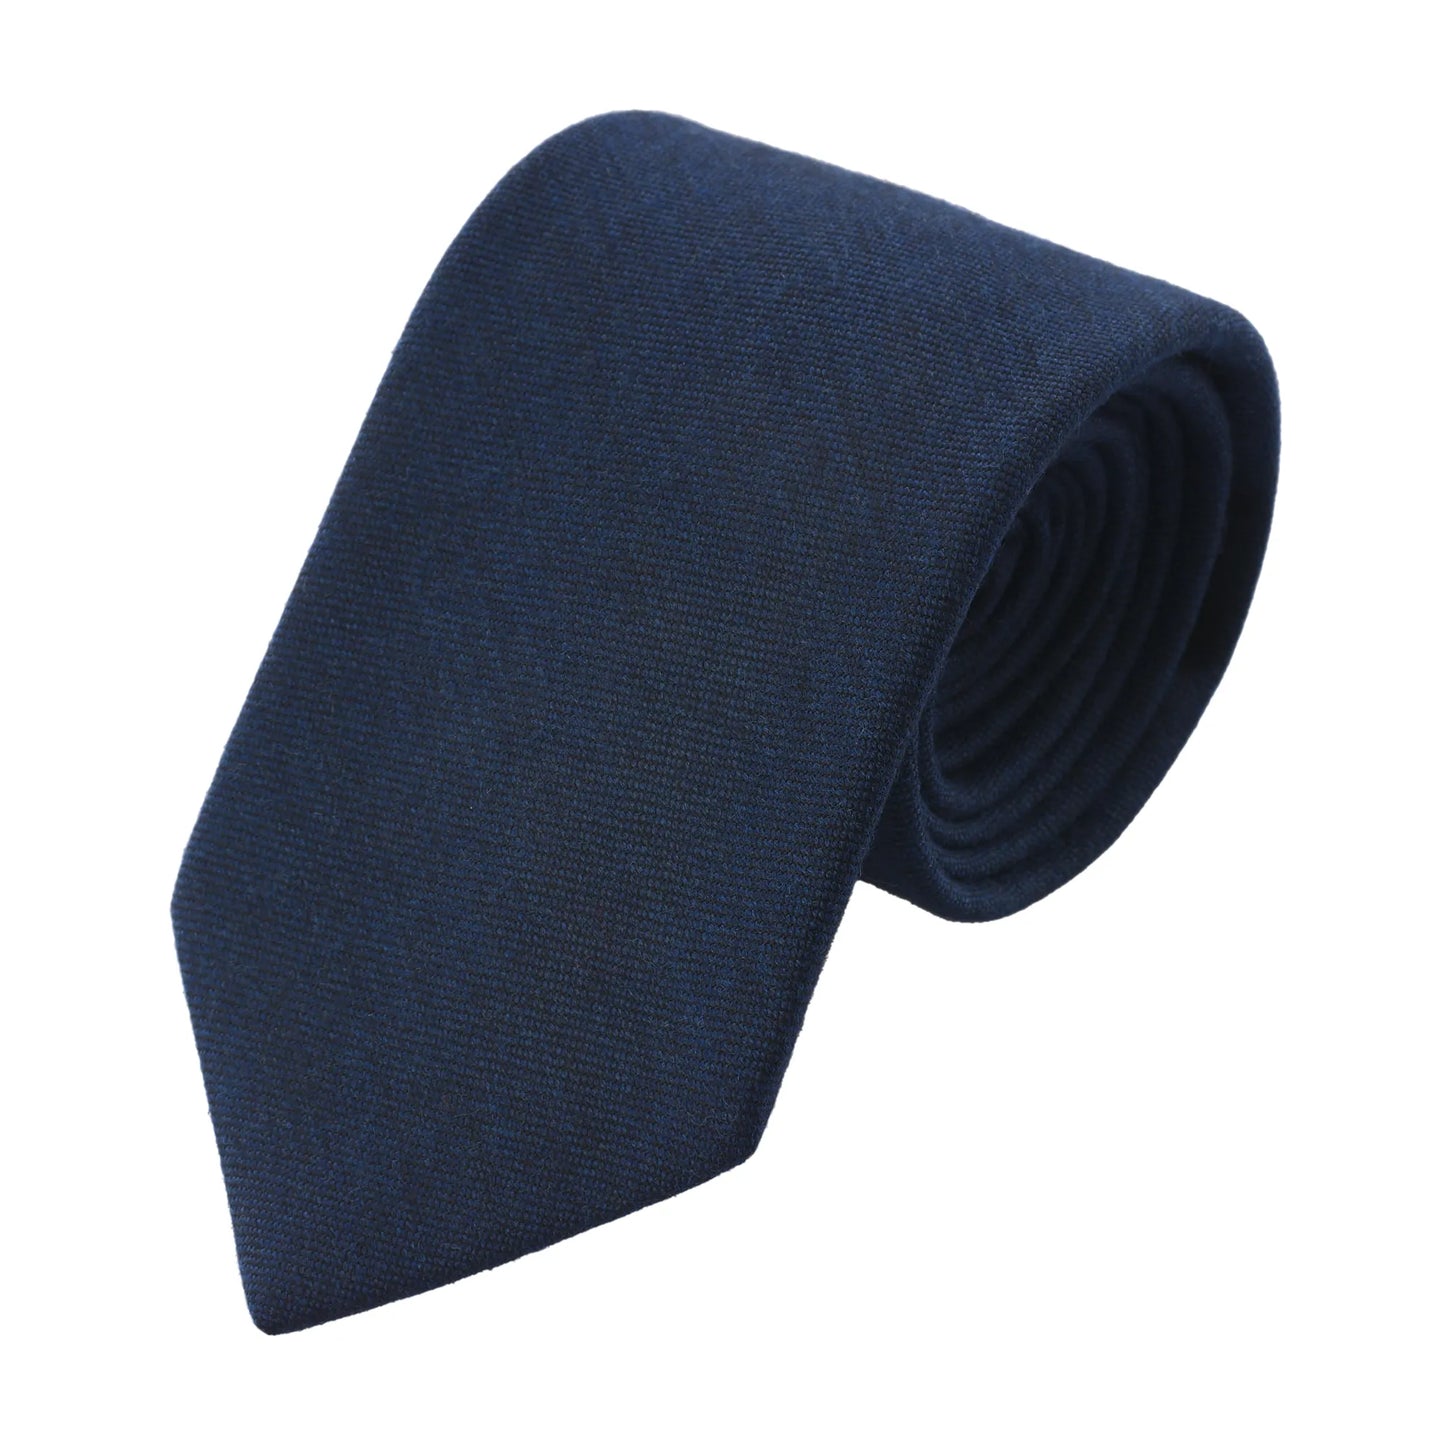 Woven Lined Navy Blue Tie